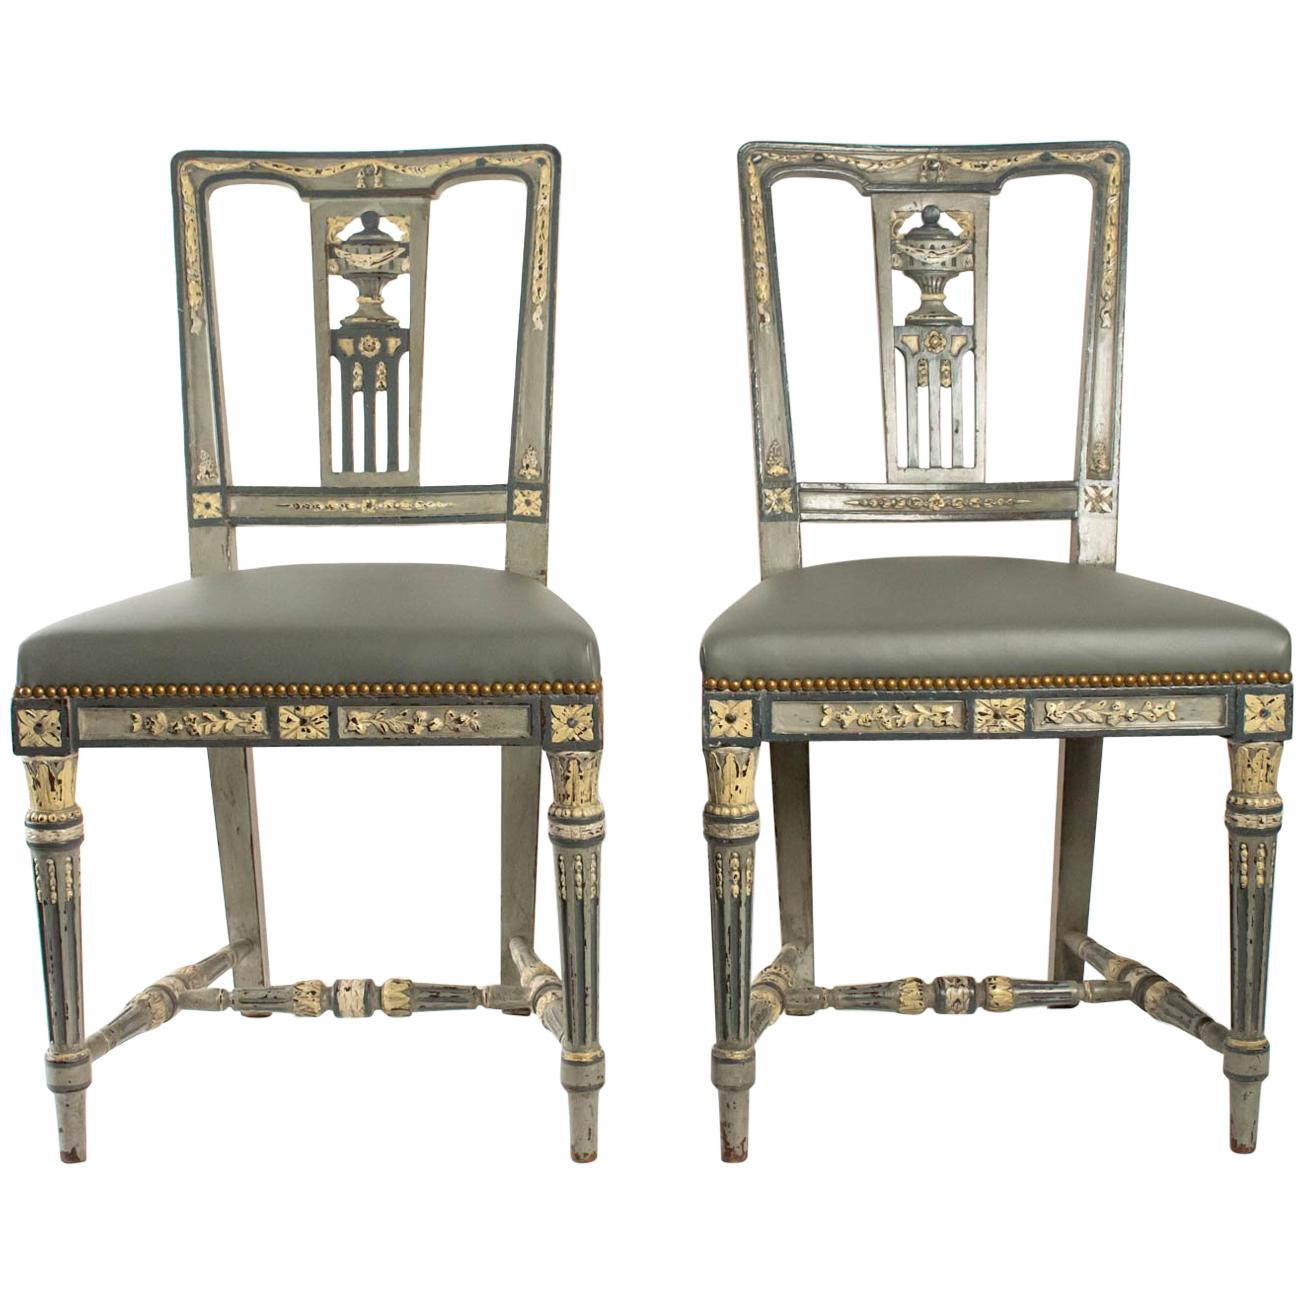 Pair Of Chairs Louis XVI Style From The 19th Century, Antiquity